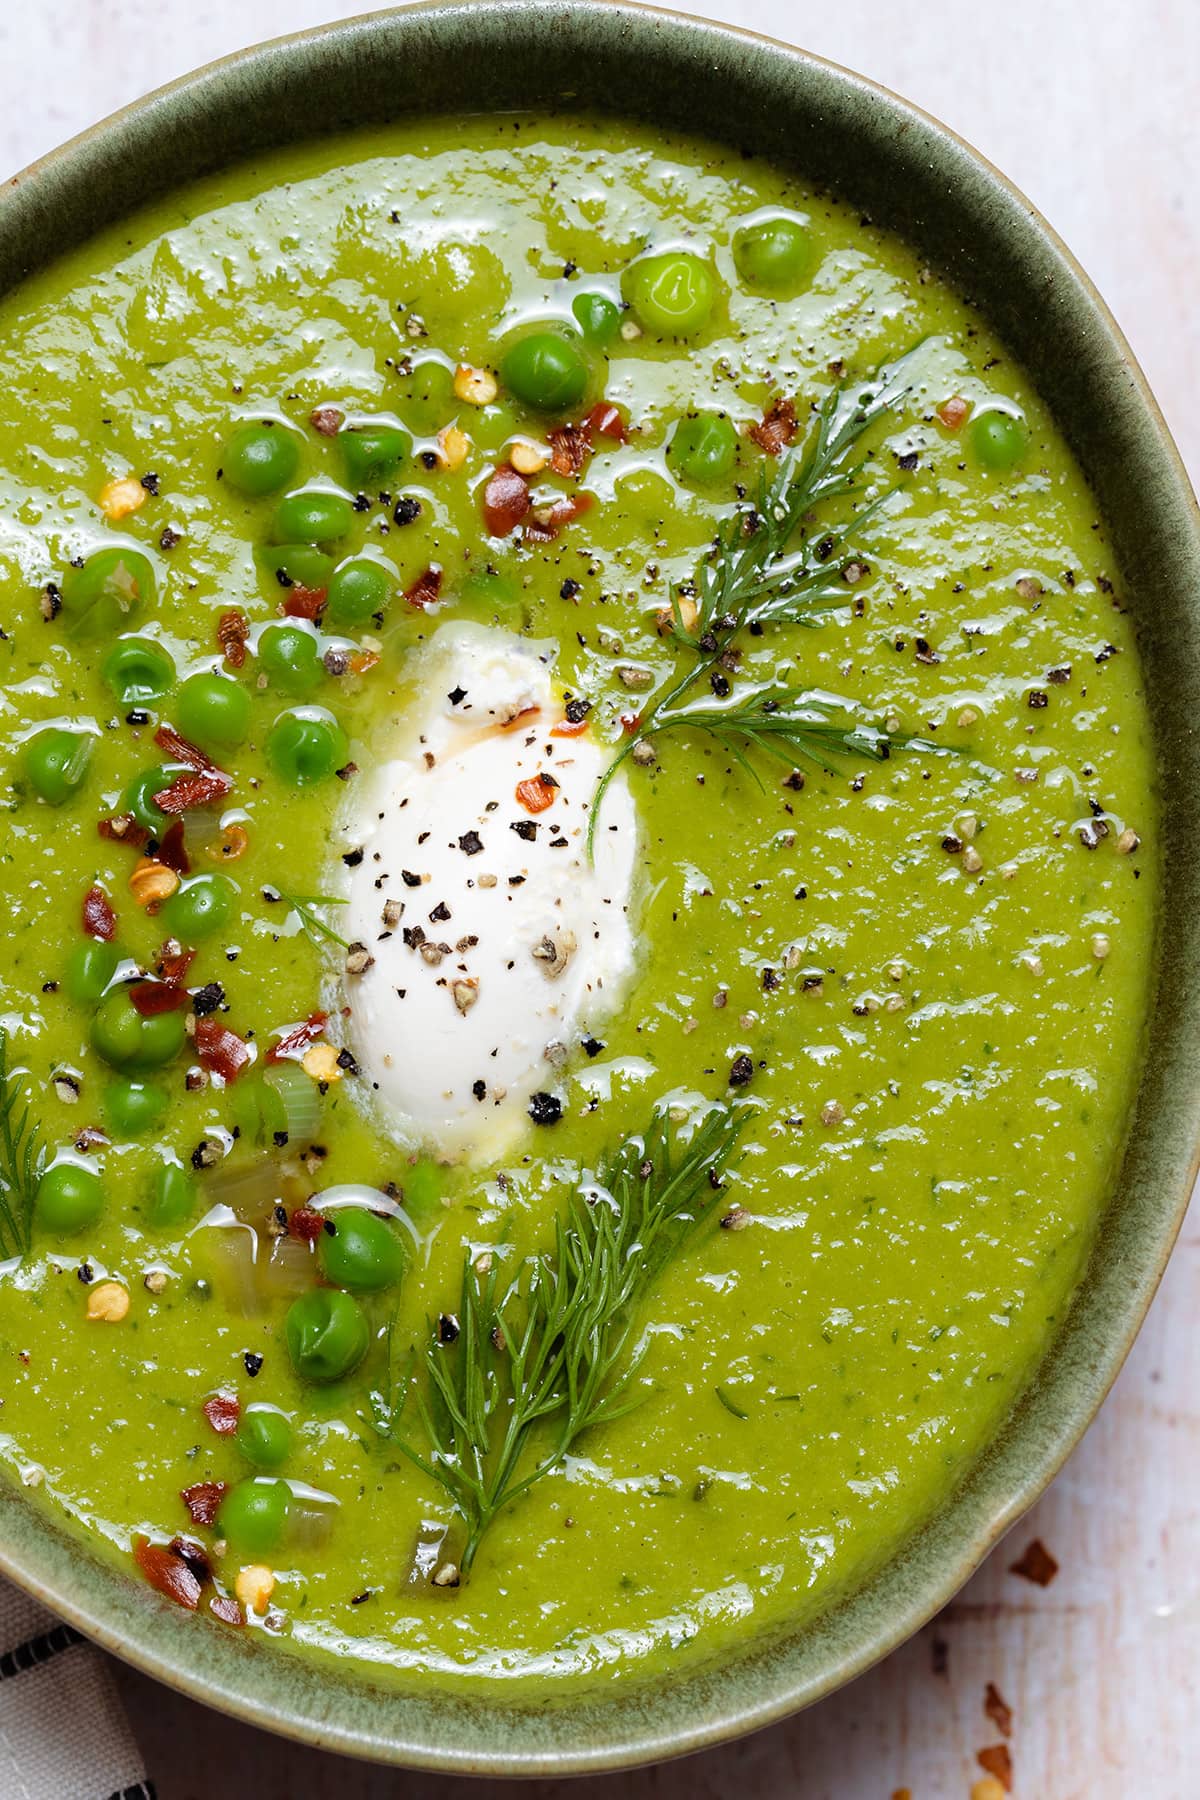 A close up of green bowl with green soup garnished with peas, fresh, dill, chili flakes, and creme fraiche.